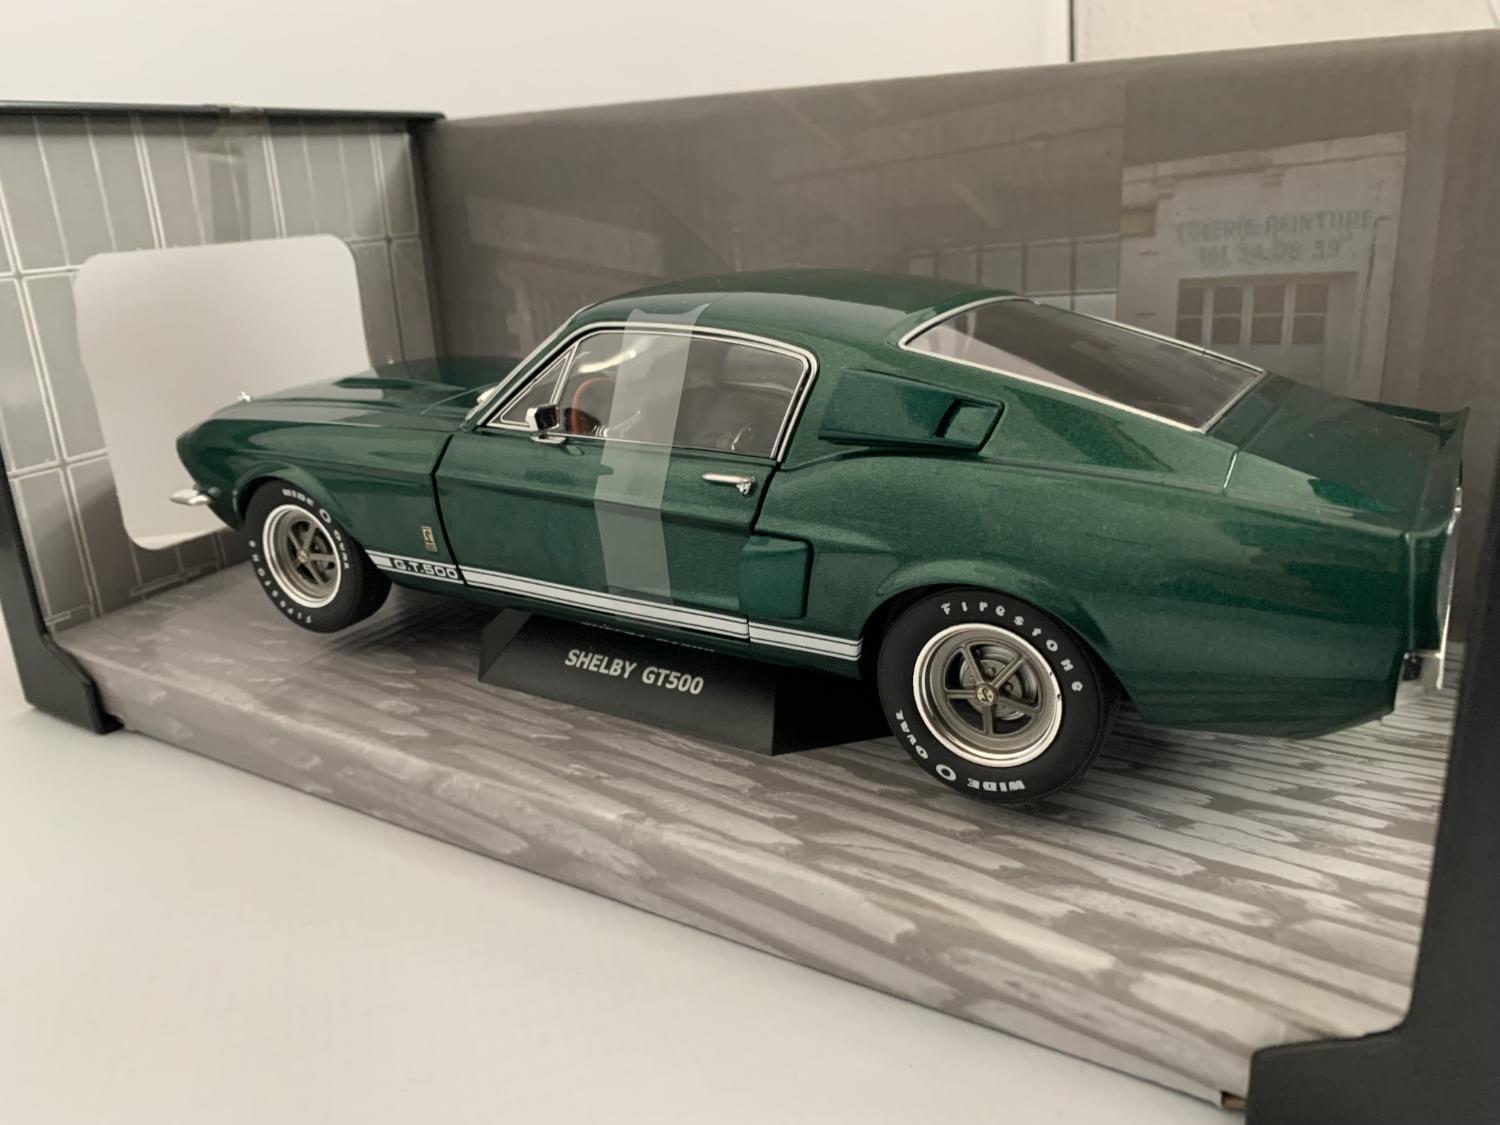 Shelby Mustang GT500 1967 in dark highland green 1:18 scale model from Solido